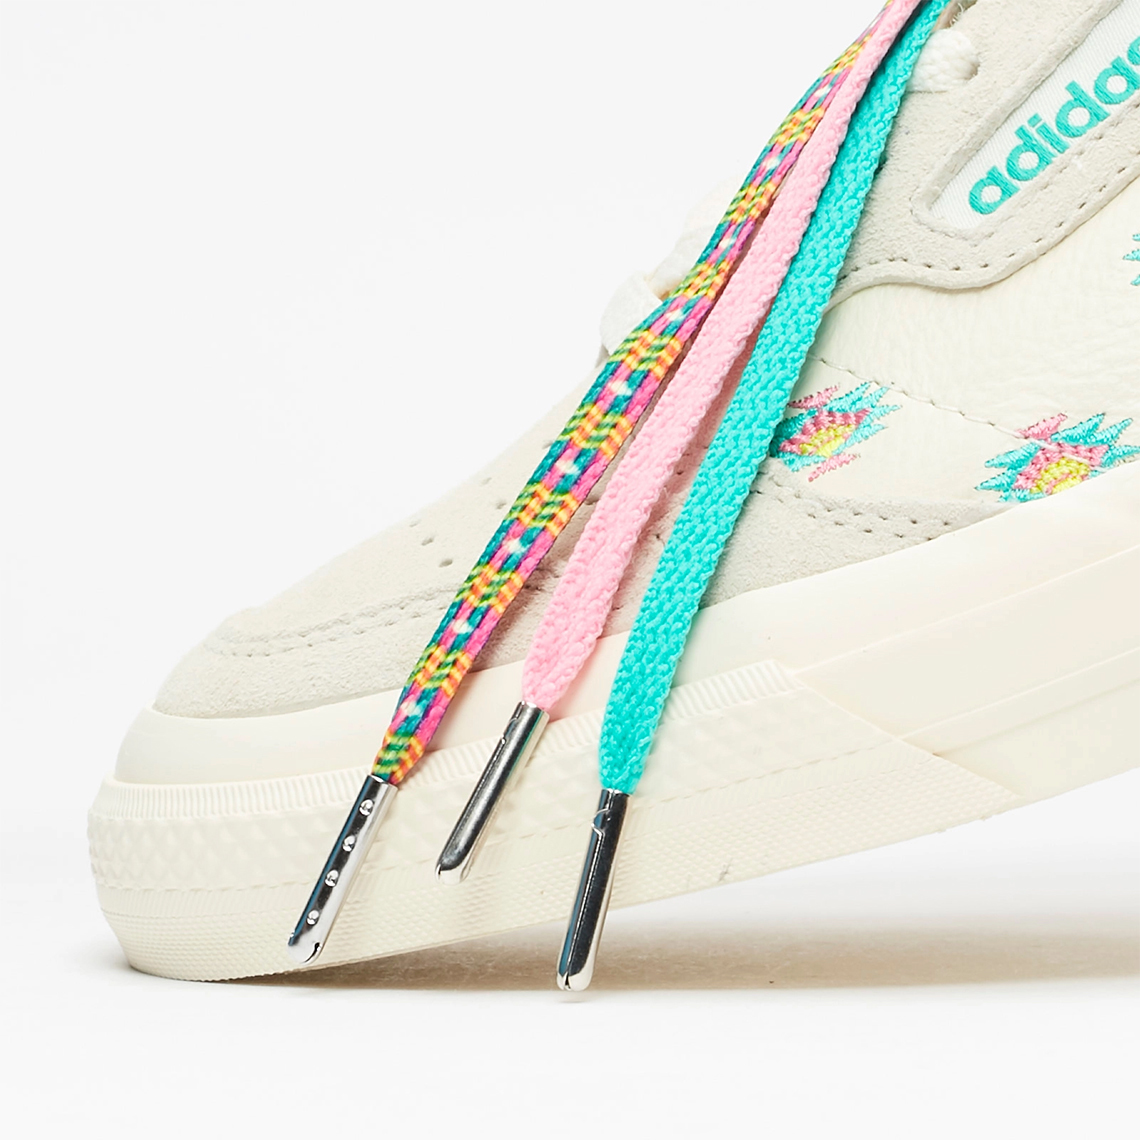 AriZona Iced Tea x Adidas Originals Are Back Again For A New Retail Release!